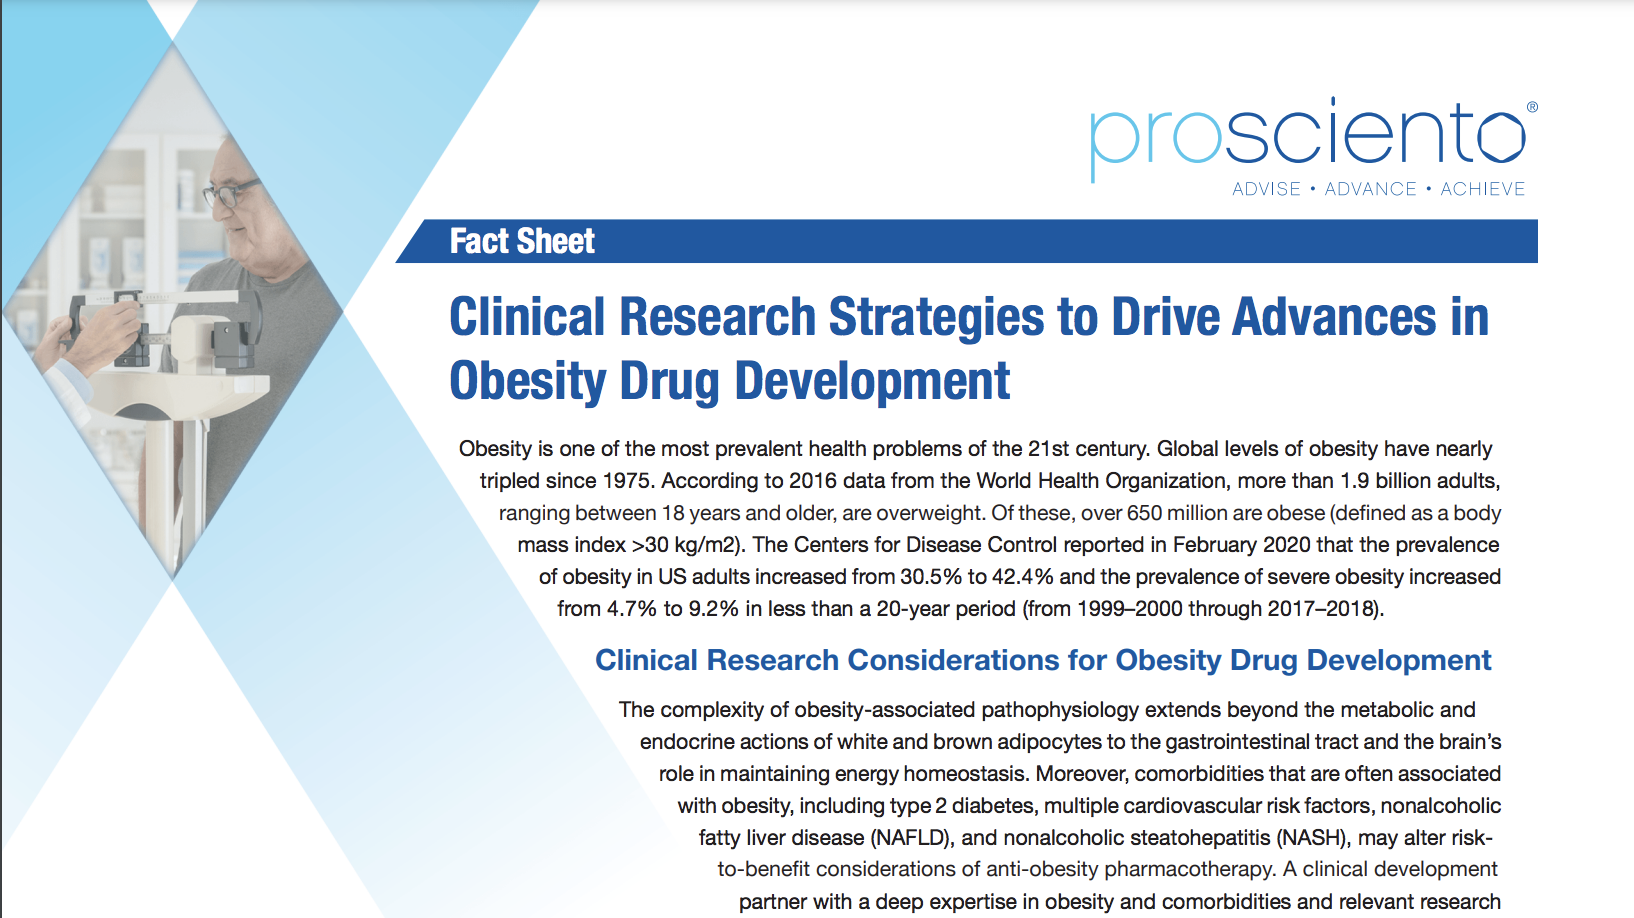 ProSciento Overview: Clinical R&D Services for Metabolic Diseases thumbnail